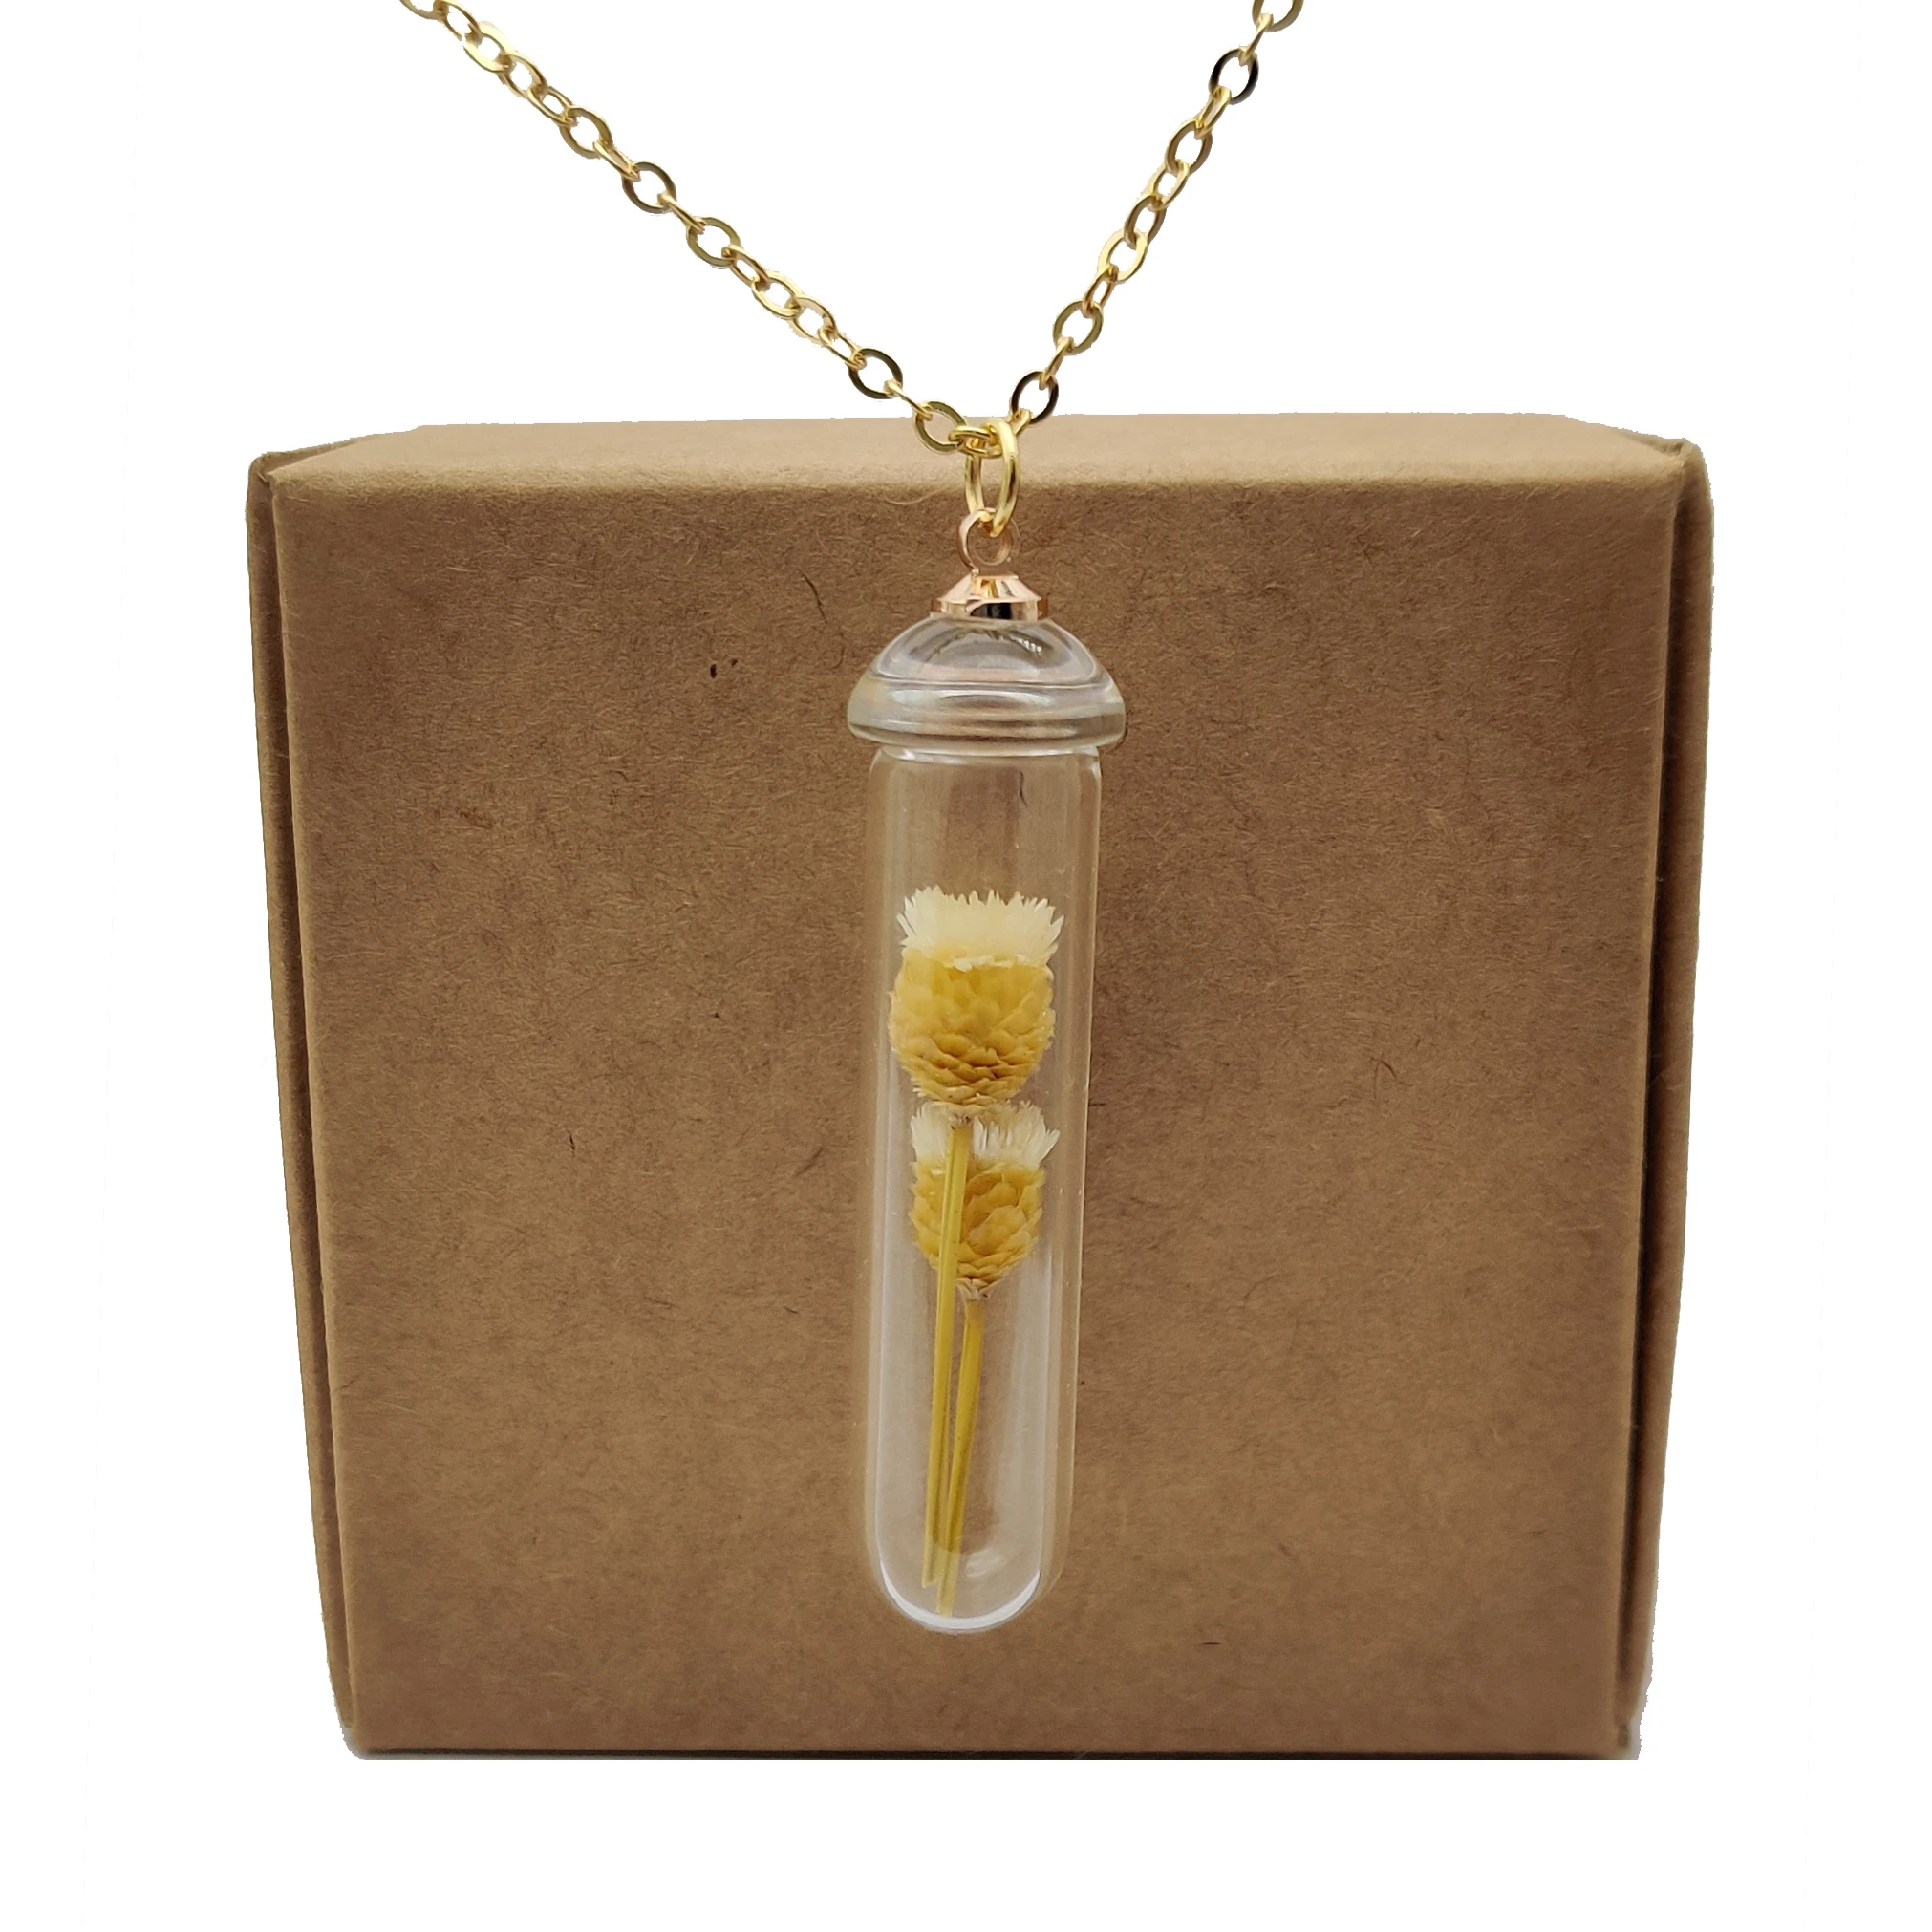 Happy Daisy Transparent Glass Bottle Pendant Gold Color Chain Long Necklace Women Boho Fashion Jewelry Bohemian Vintage Handmade 30ml frosted vitreous refillable cream glass empty bottle face essence products jewelry display cosmetics vials 6pcs